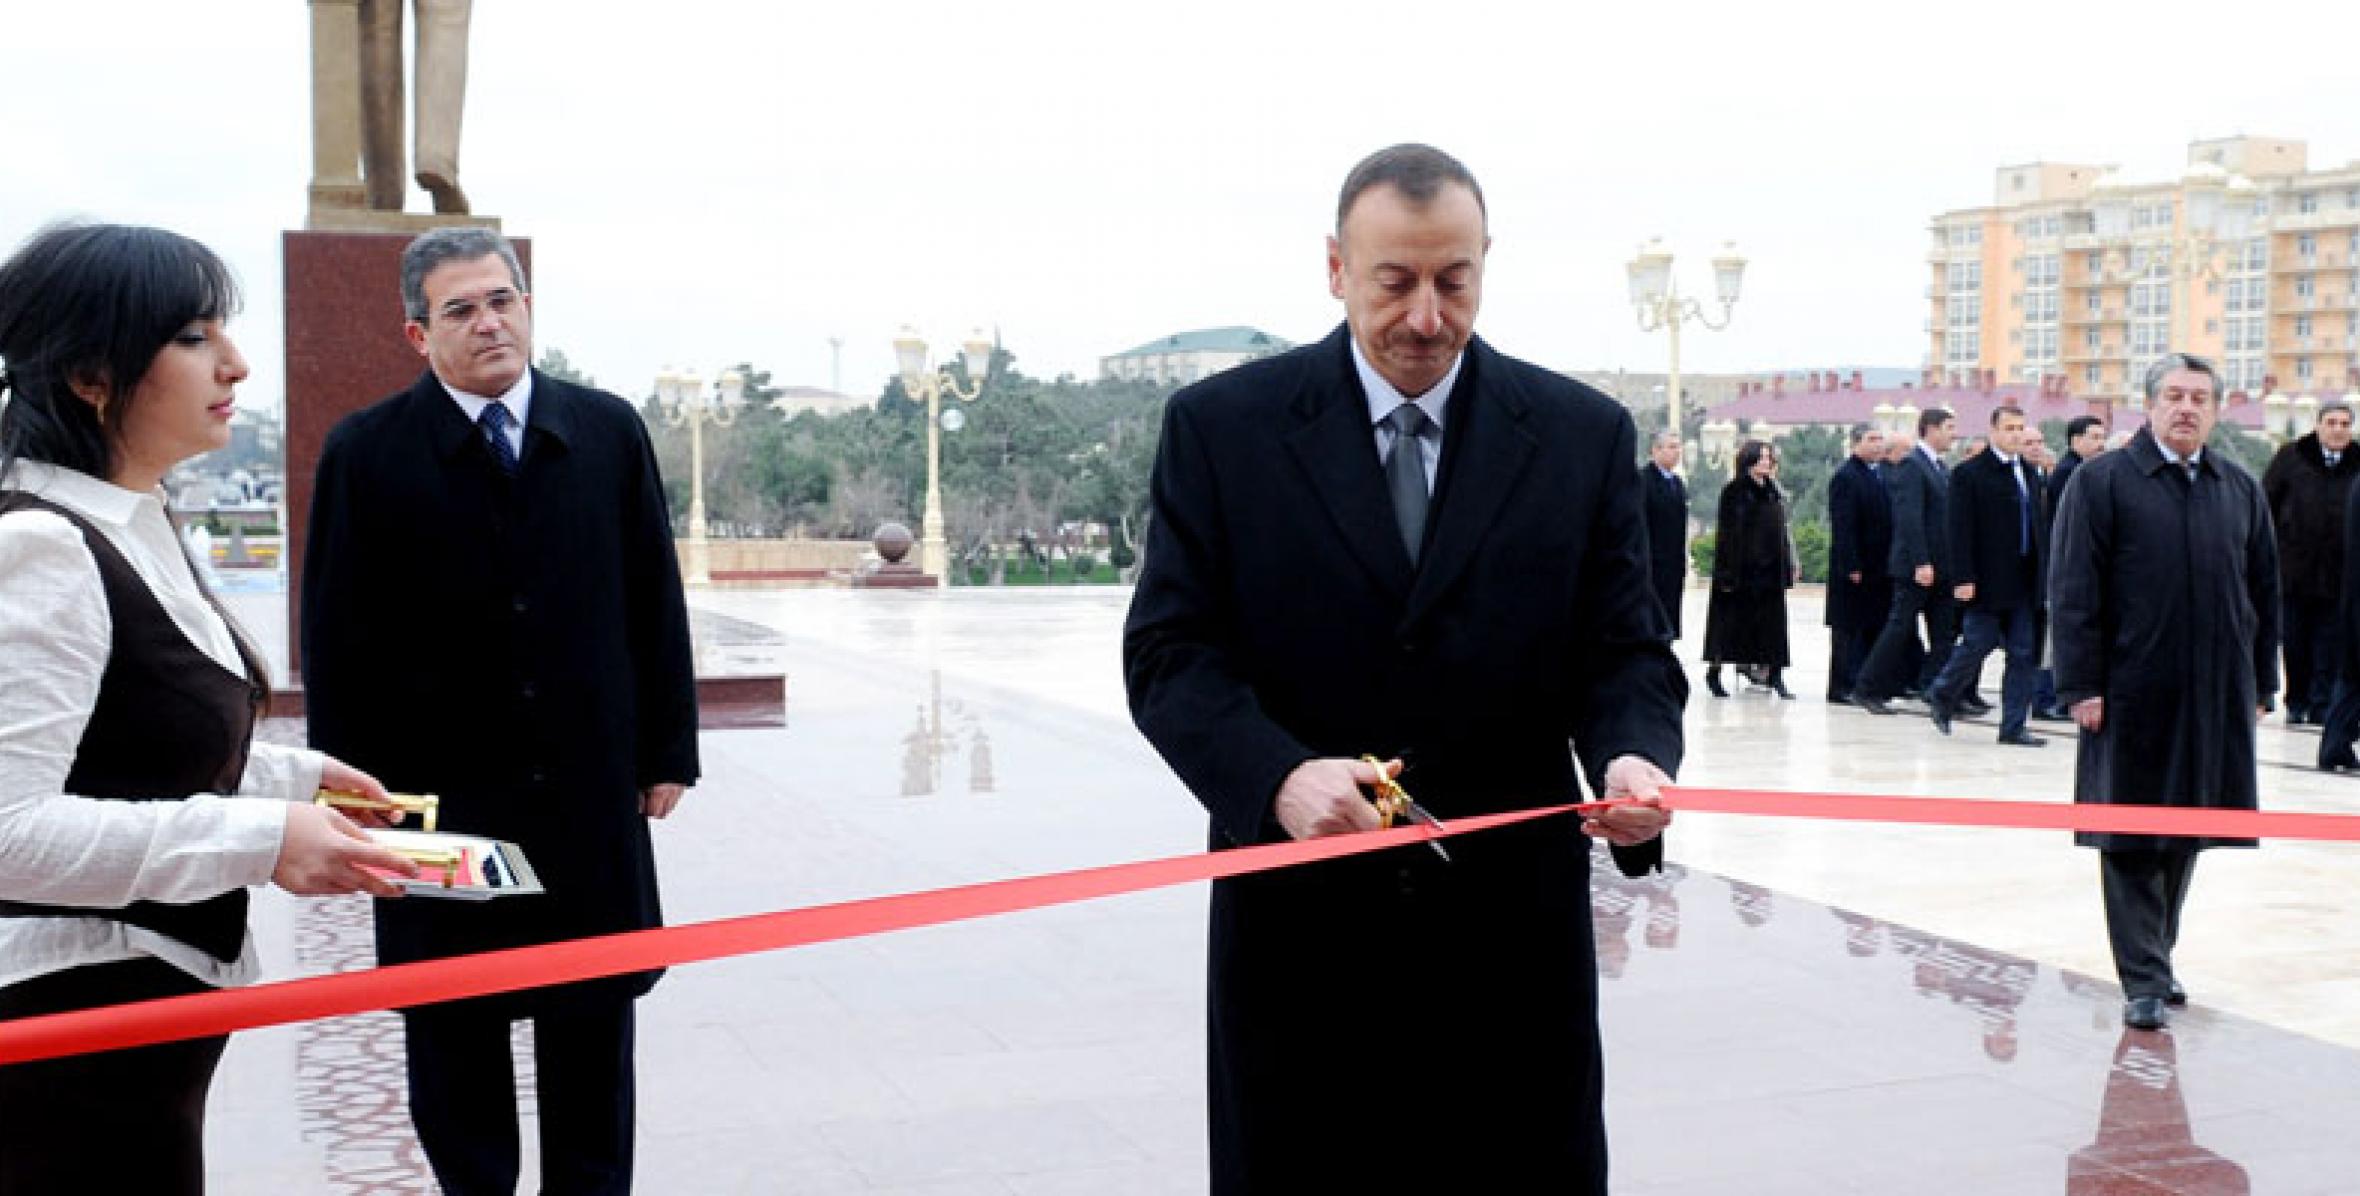 Ilham Aliyev attended the opening of the Heydar Aliyev Park, the Heydar Aliyev Center and the “Jirtdan” Children’s Entertainment Park